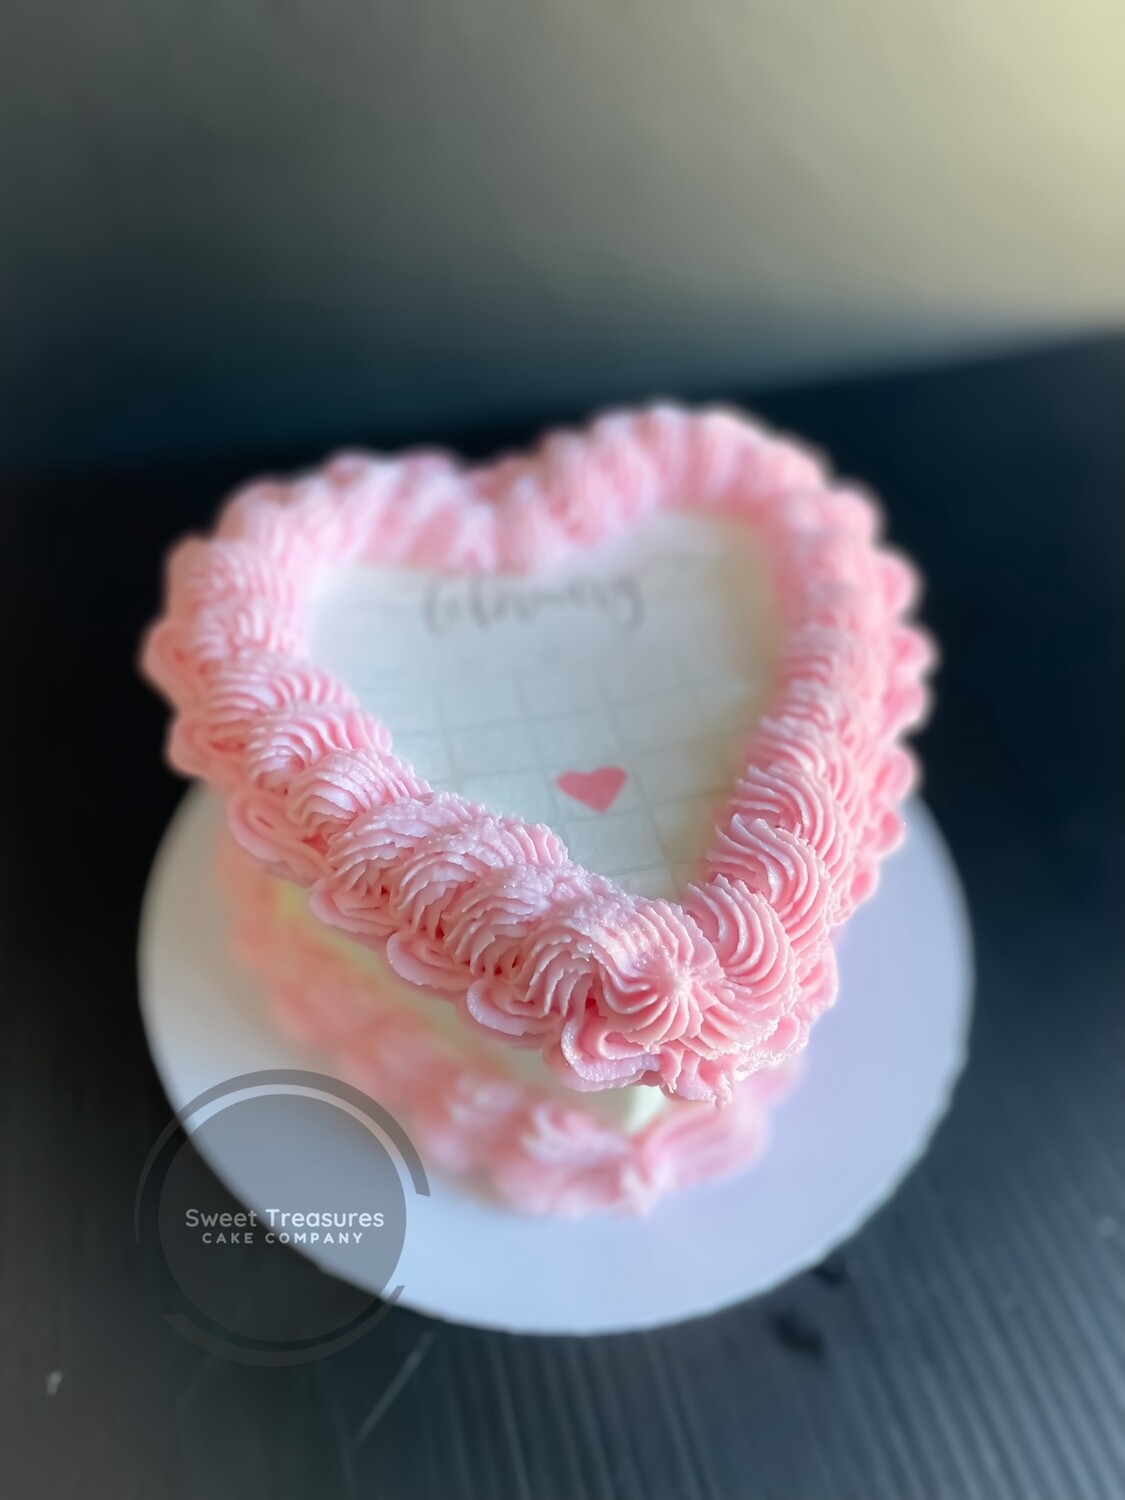 Heart shaped Burn Reveal Buttercream Single tier Cake, Size: 6 inches (15cm wide): 2 layers tall (8cm), 1 layer of filling: up to 4 servings, Upsize (Add Layer); Make sure to match correctly: No thank you